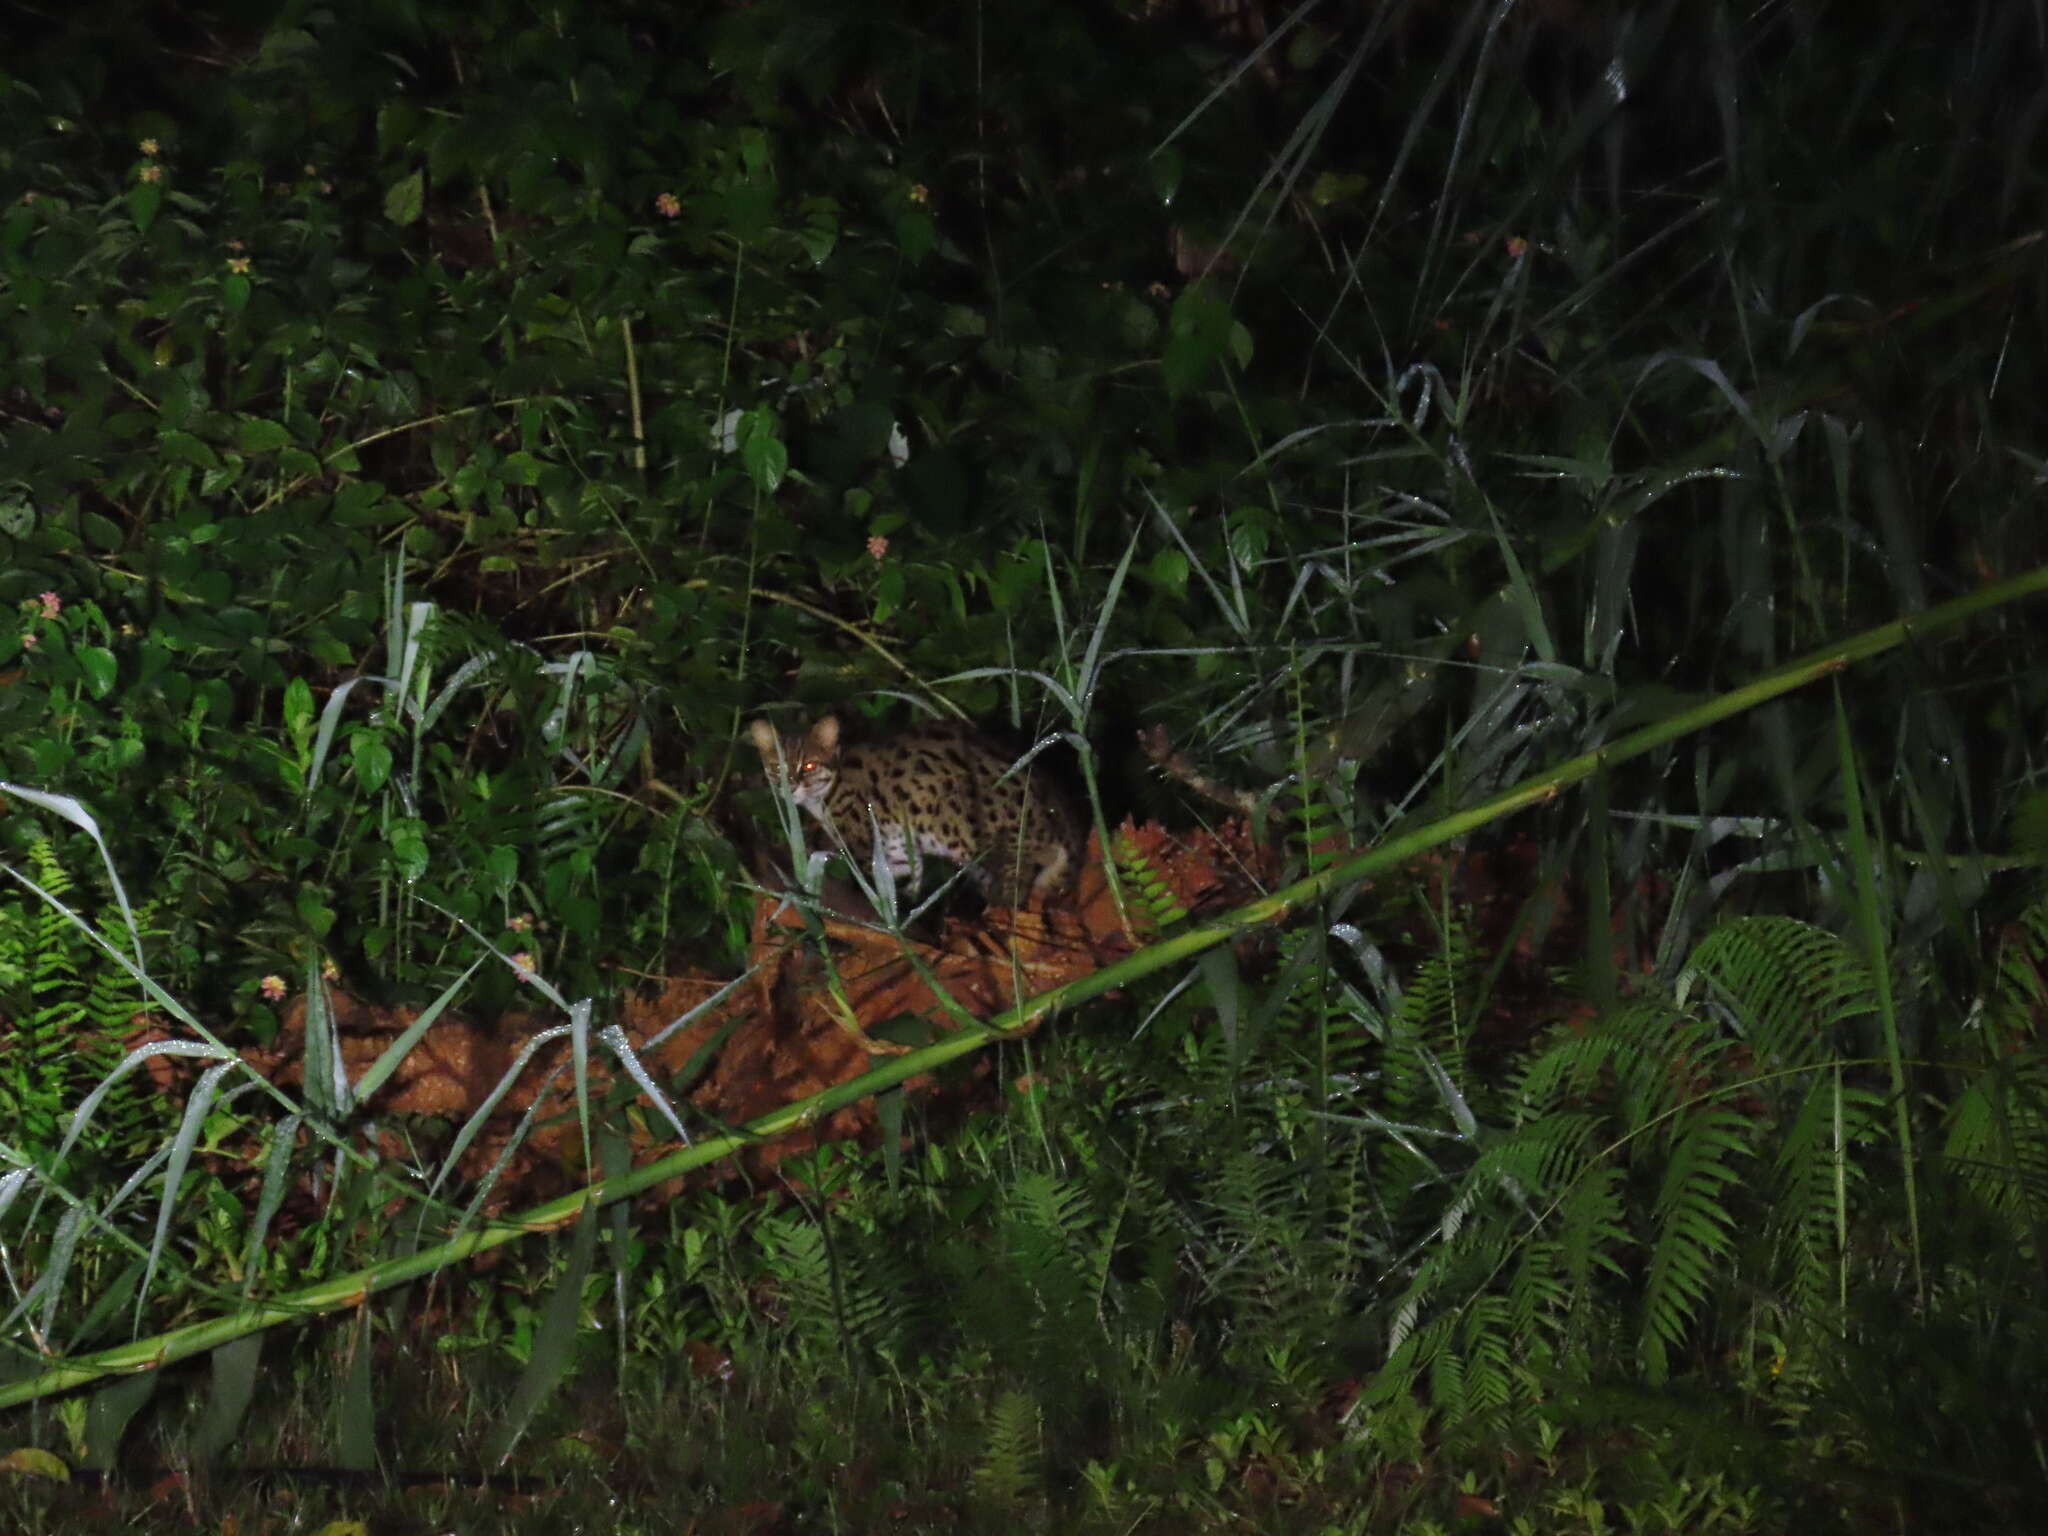 Image of Asian spotted cats